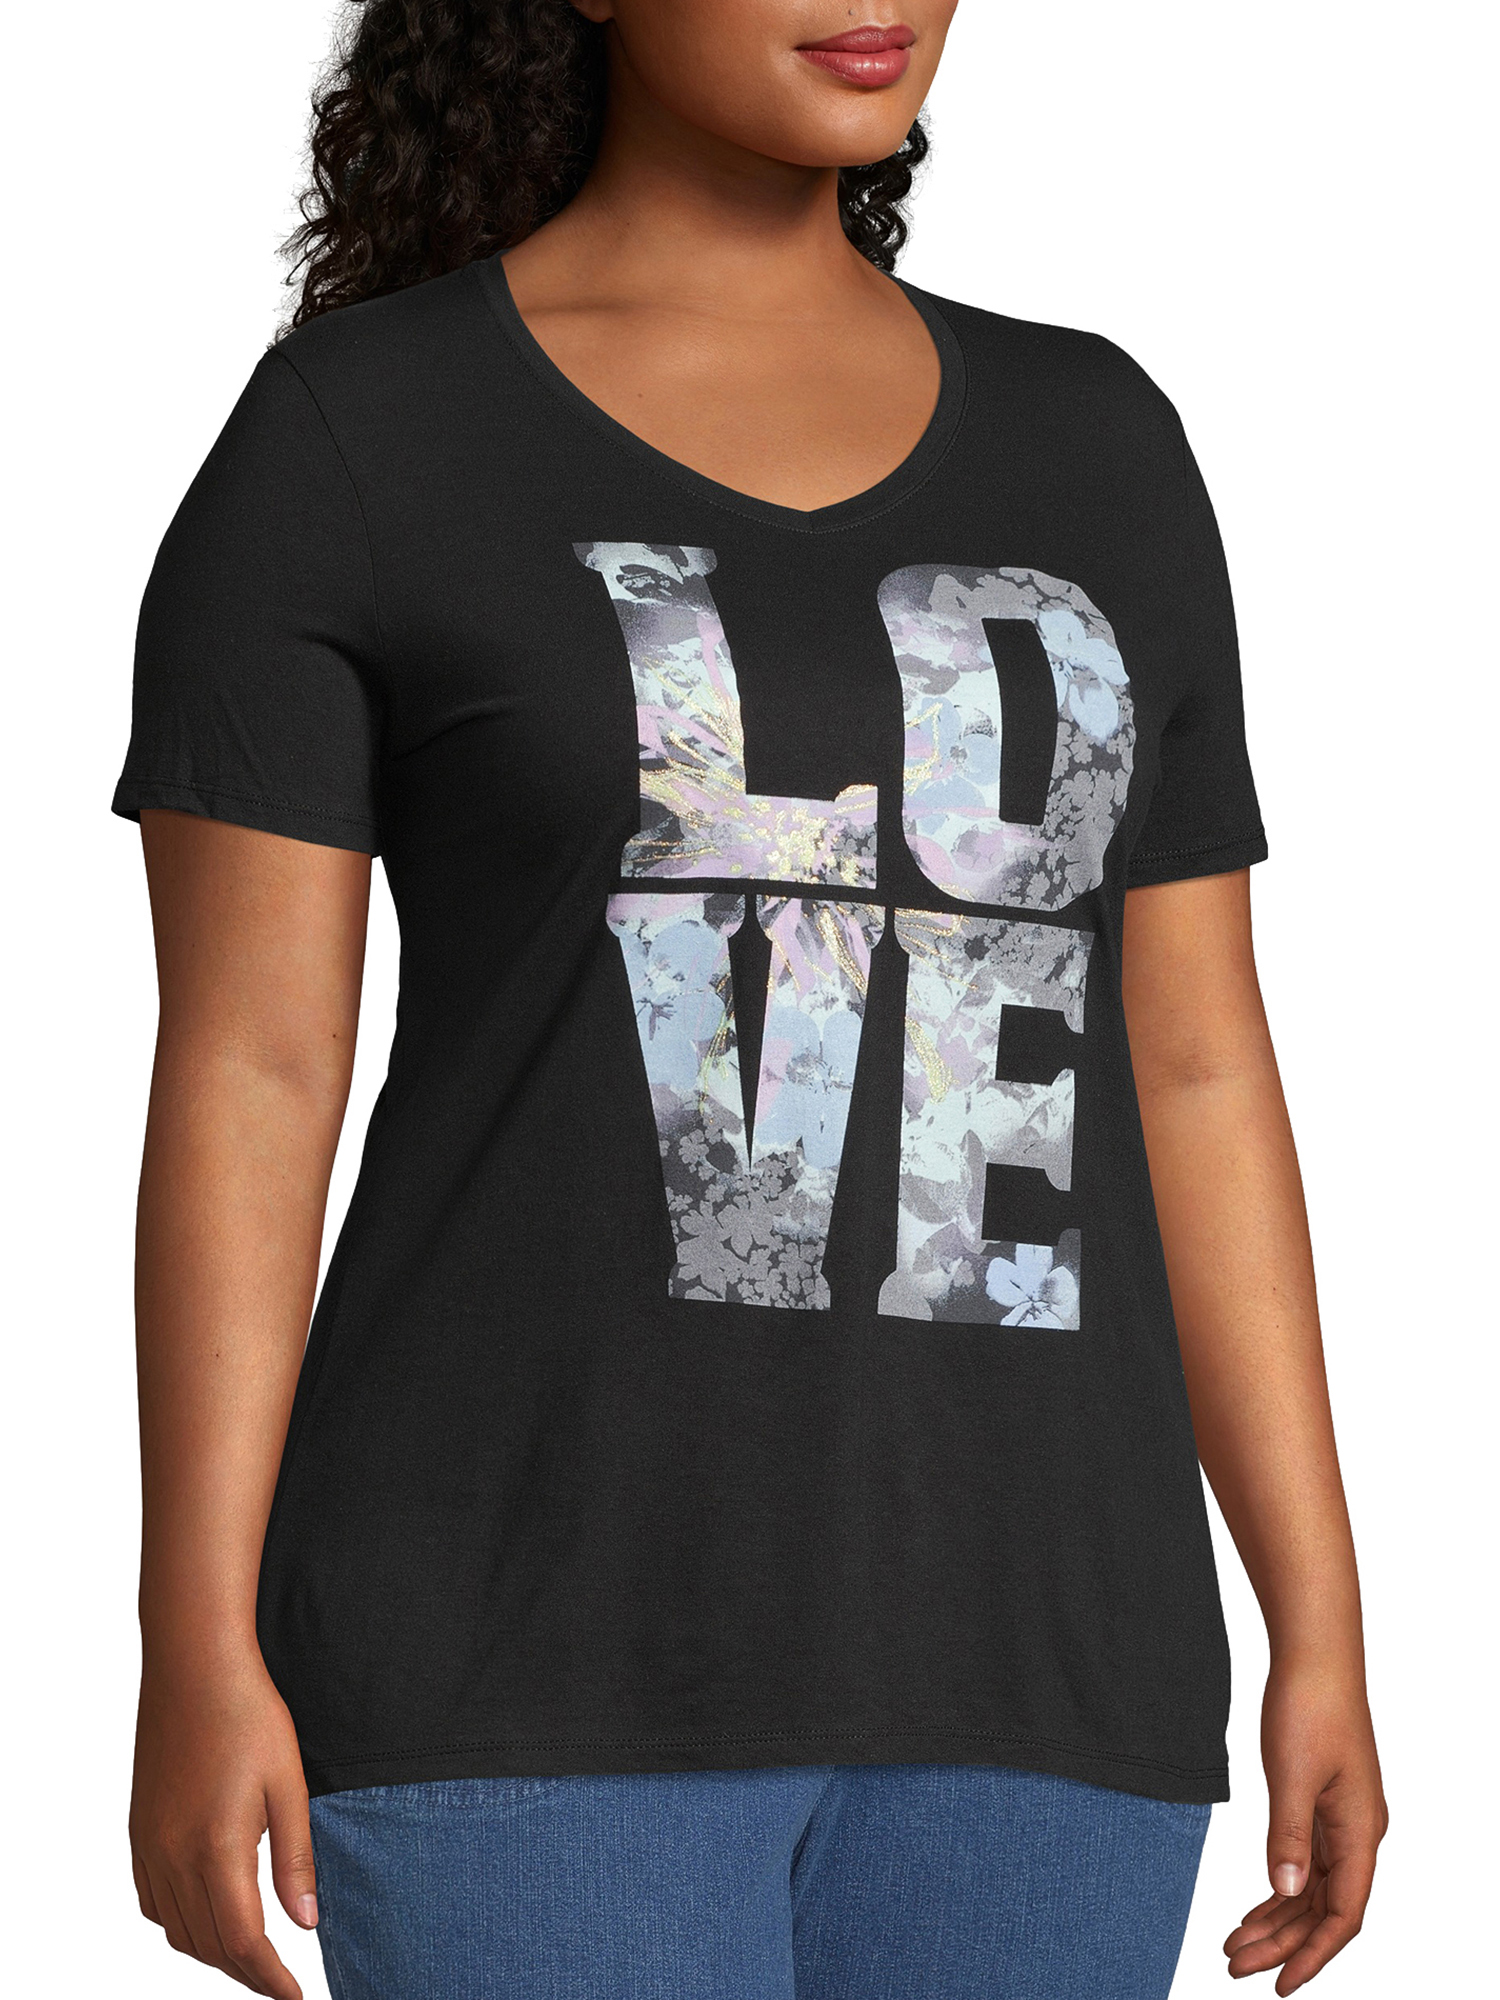 Just My Size Women's Plus Size Graphic Short Sleeve V-neck Tee - image 2 of 5